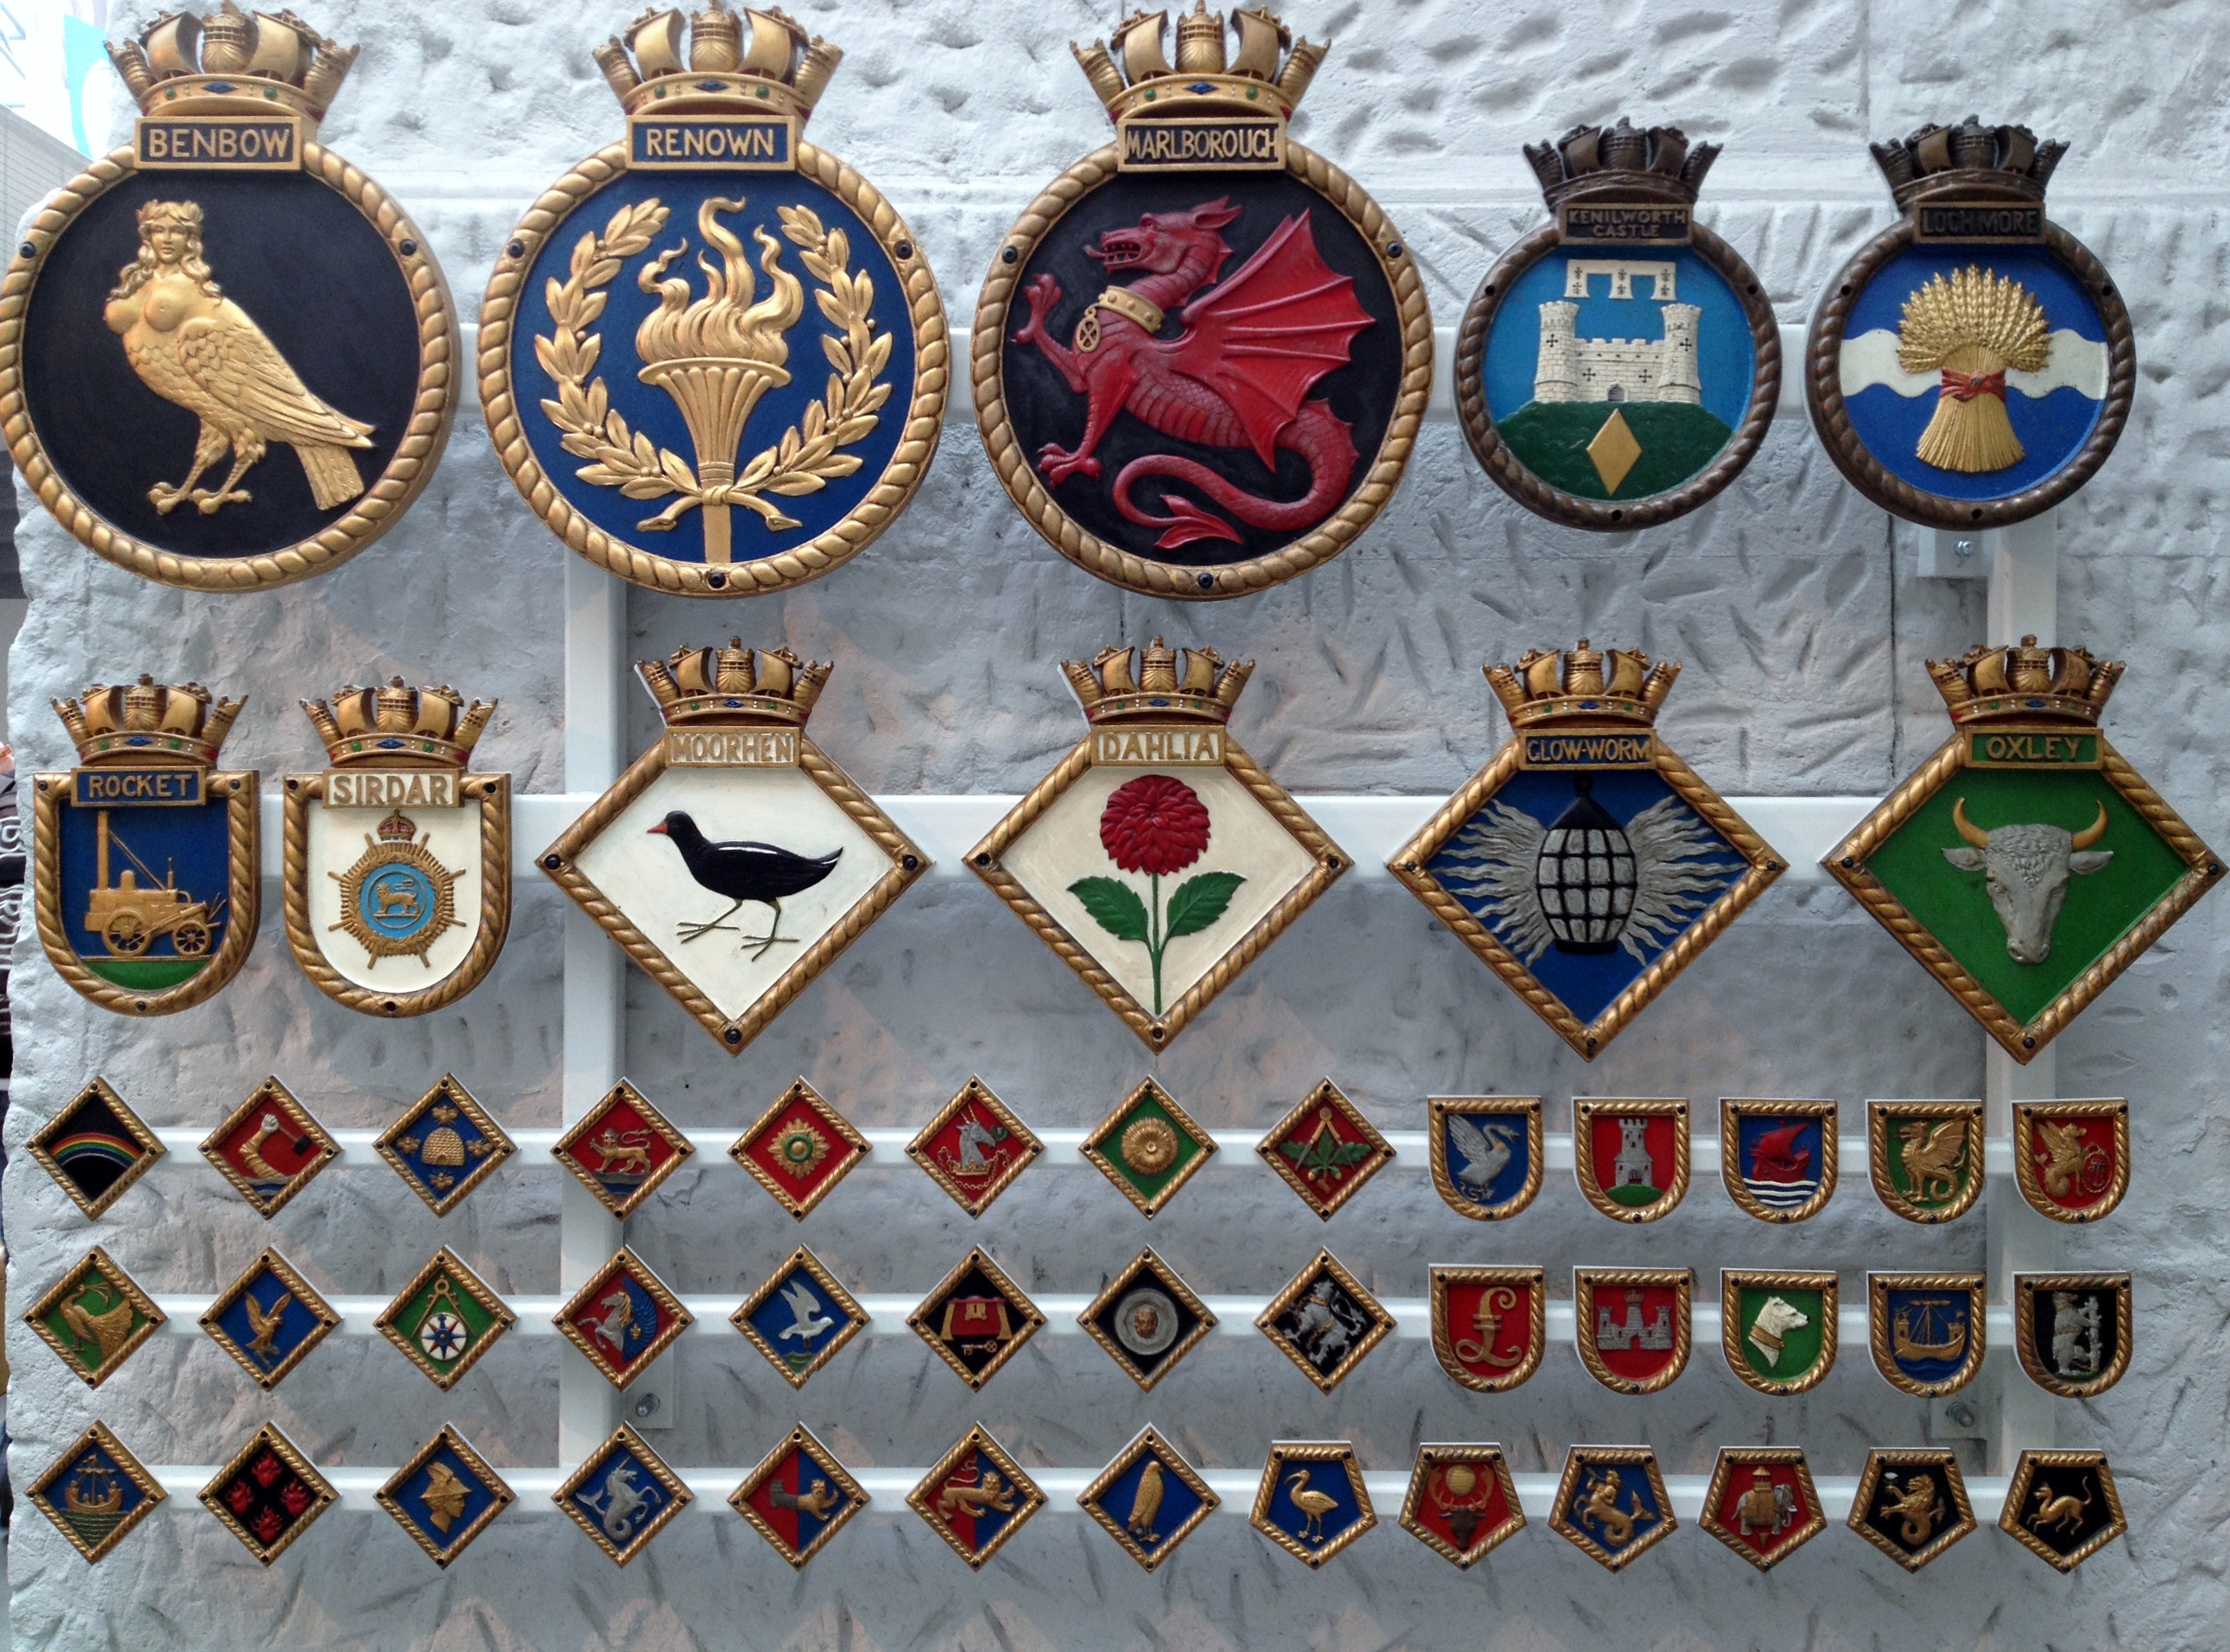 Ship badges from the National Maritime Museum. The top row shows HMS Benbow, HMS Renown, HMS Marlborough, HMS Kenilworth Castle and HMS Loch More